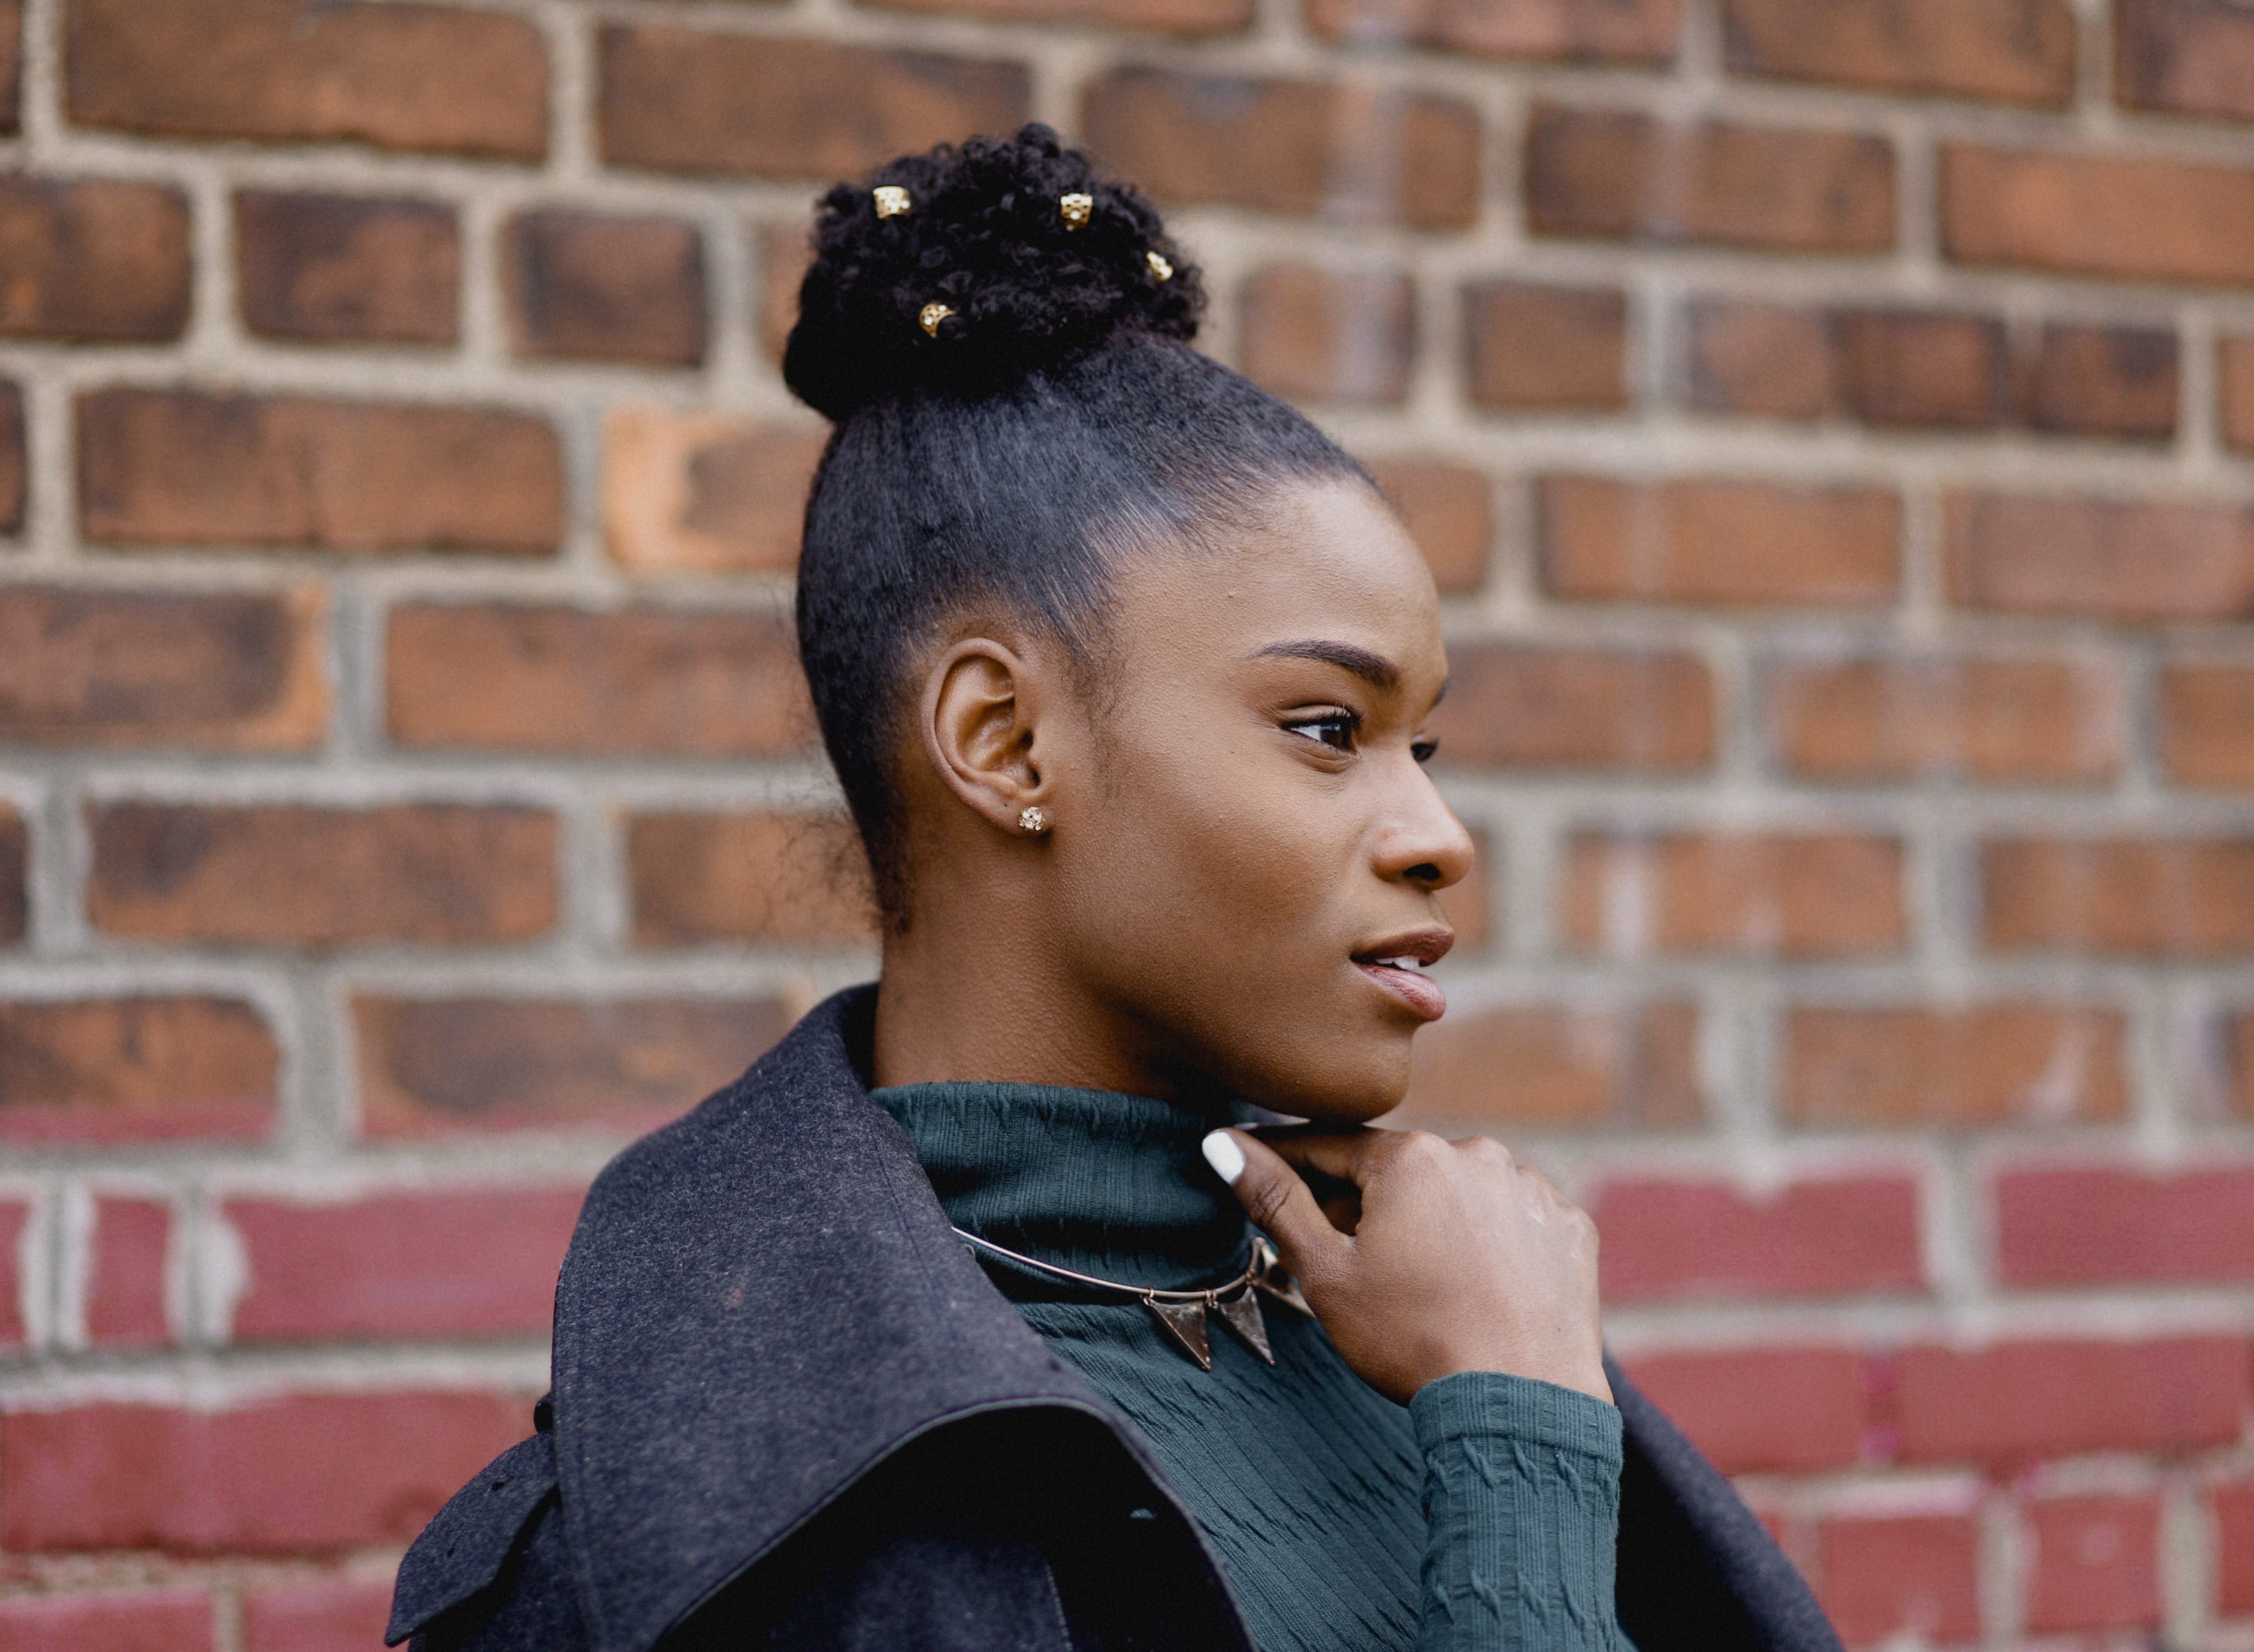 IG Natural Hairstyles: 21 High Bun / Top Knot Styles to Rock on Any Occasion